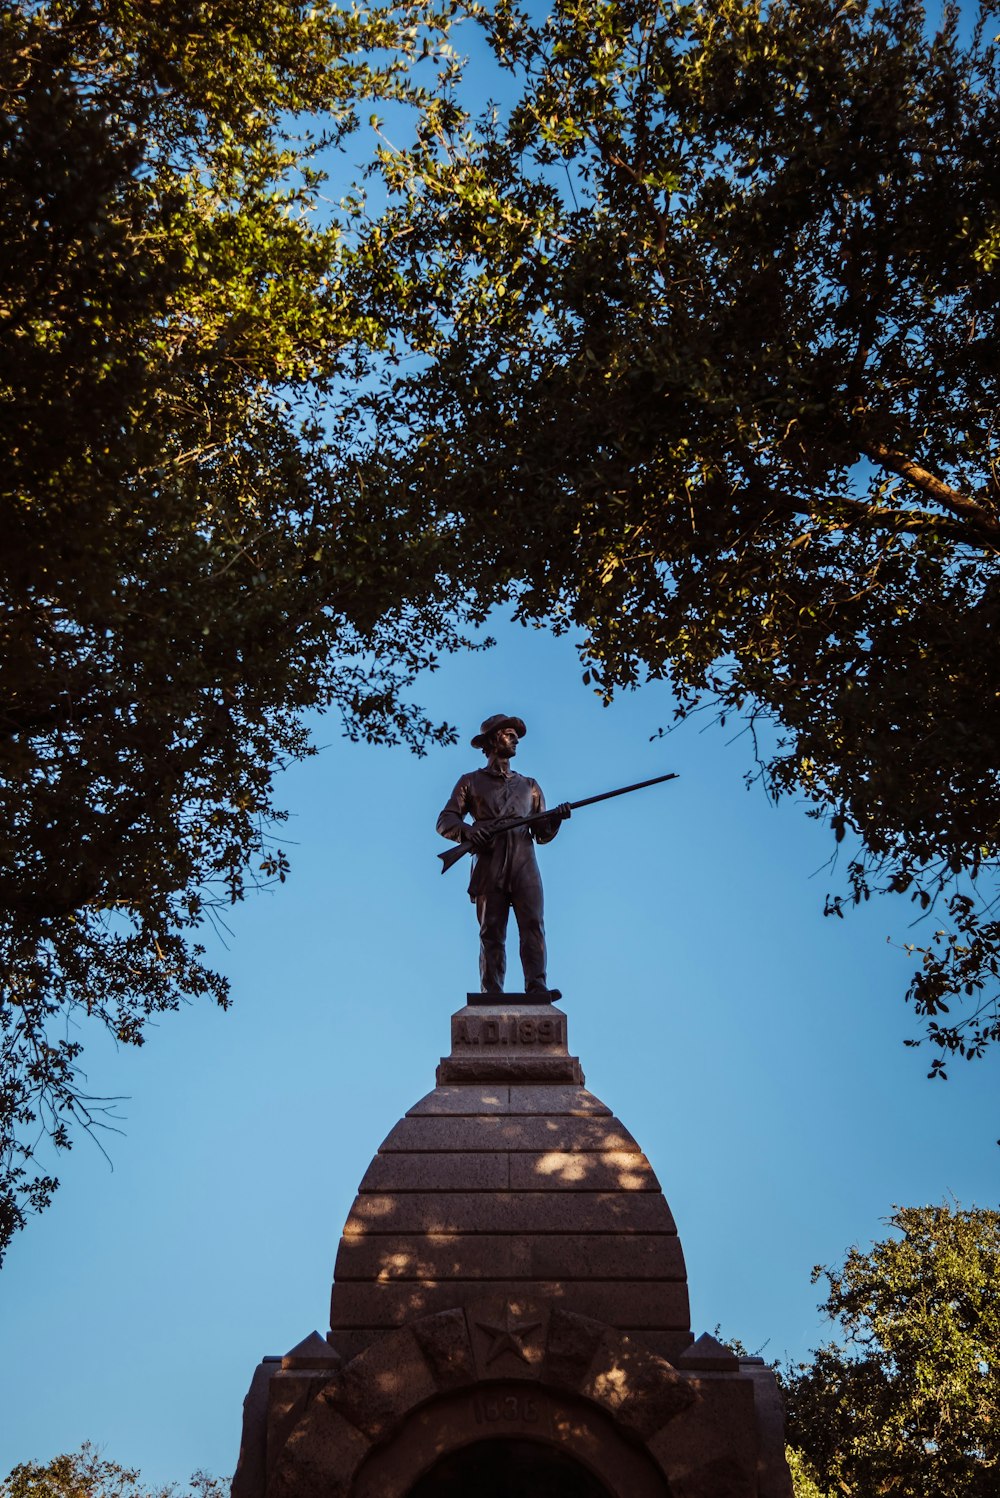 a statue of a man holding a rifle on top of a building